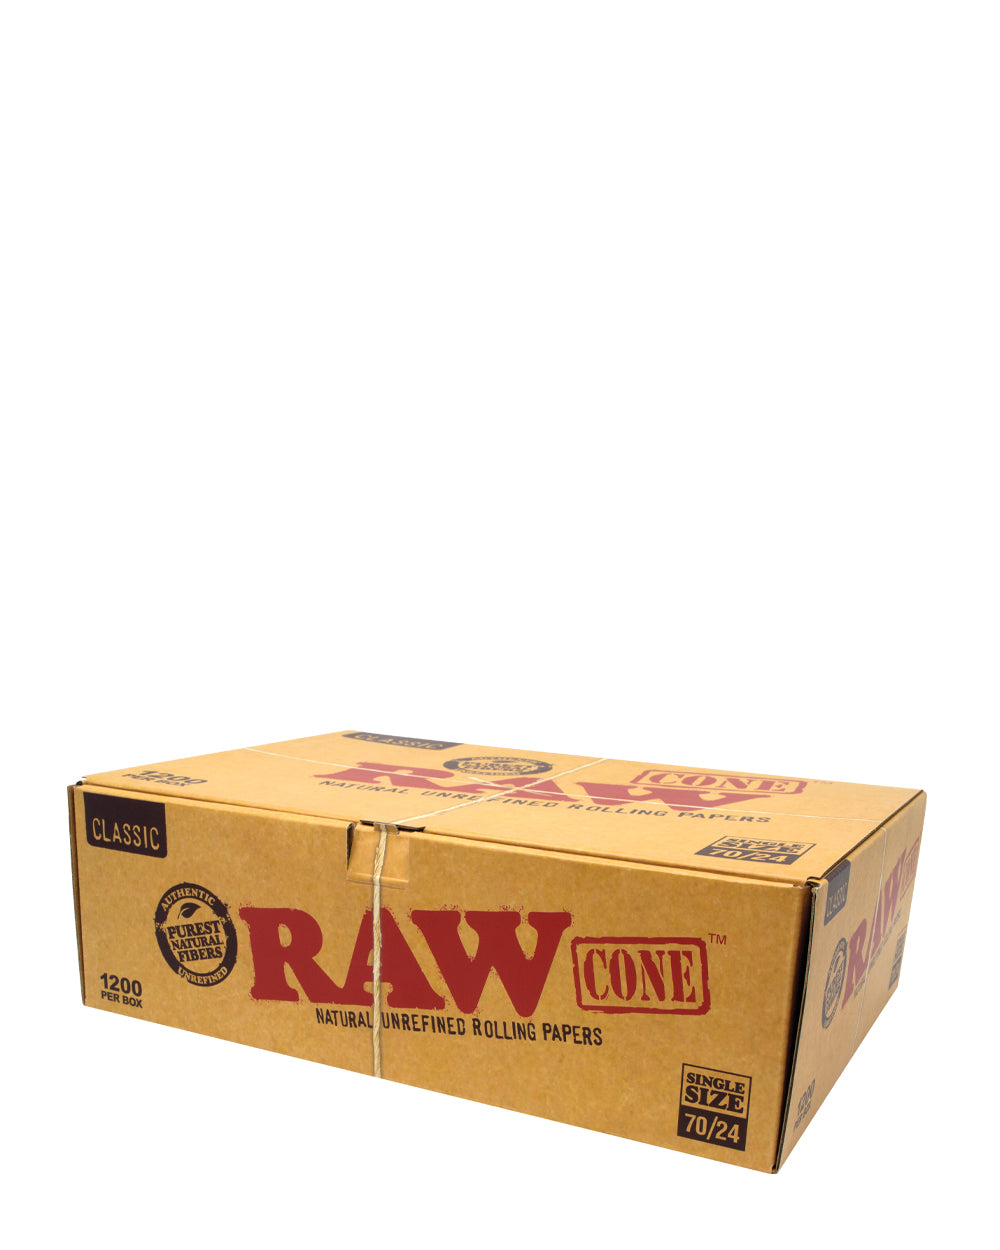 RAW | Classic Single Size Pre-Rolled Cones | 70mm - Unbleached Paper - 1200 Count - 1